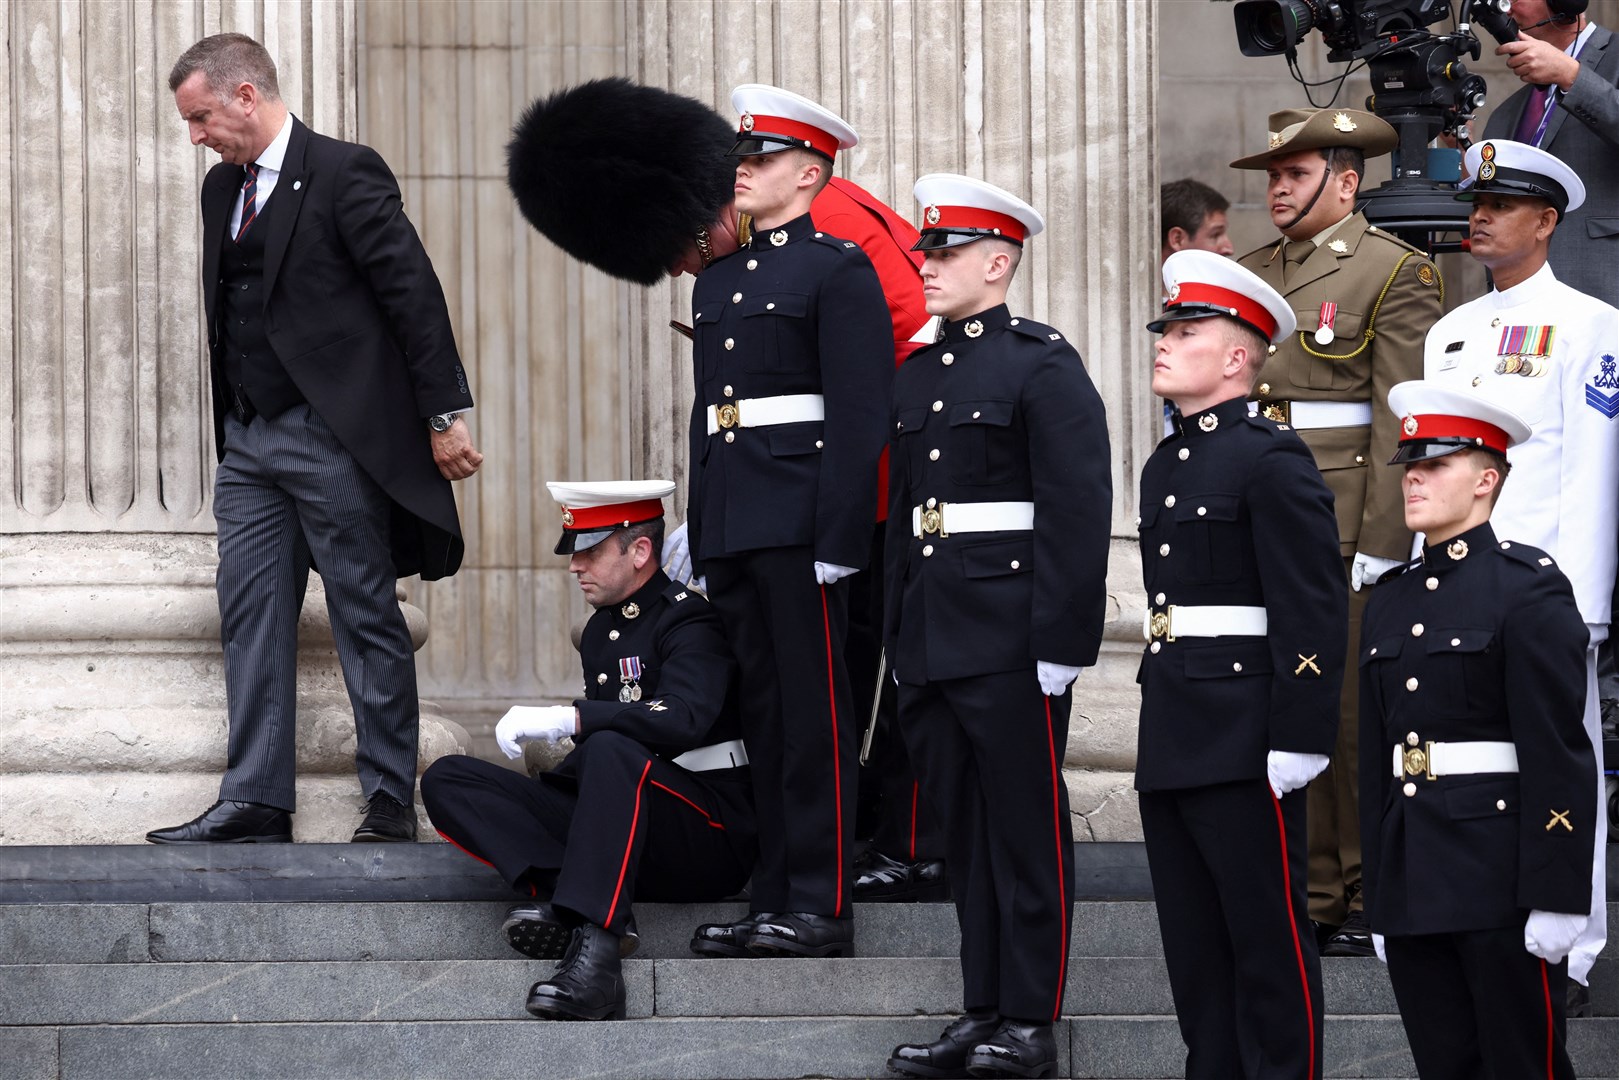 One member of the ceremonial guard felt unwell during the arrivals (Henry Nicholls/PA)